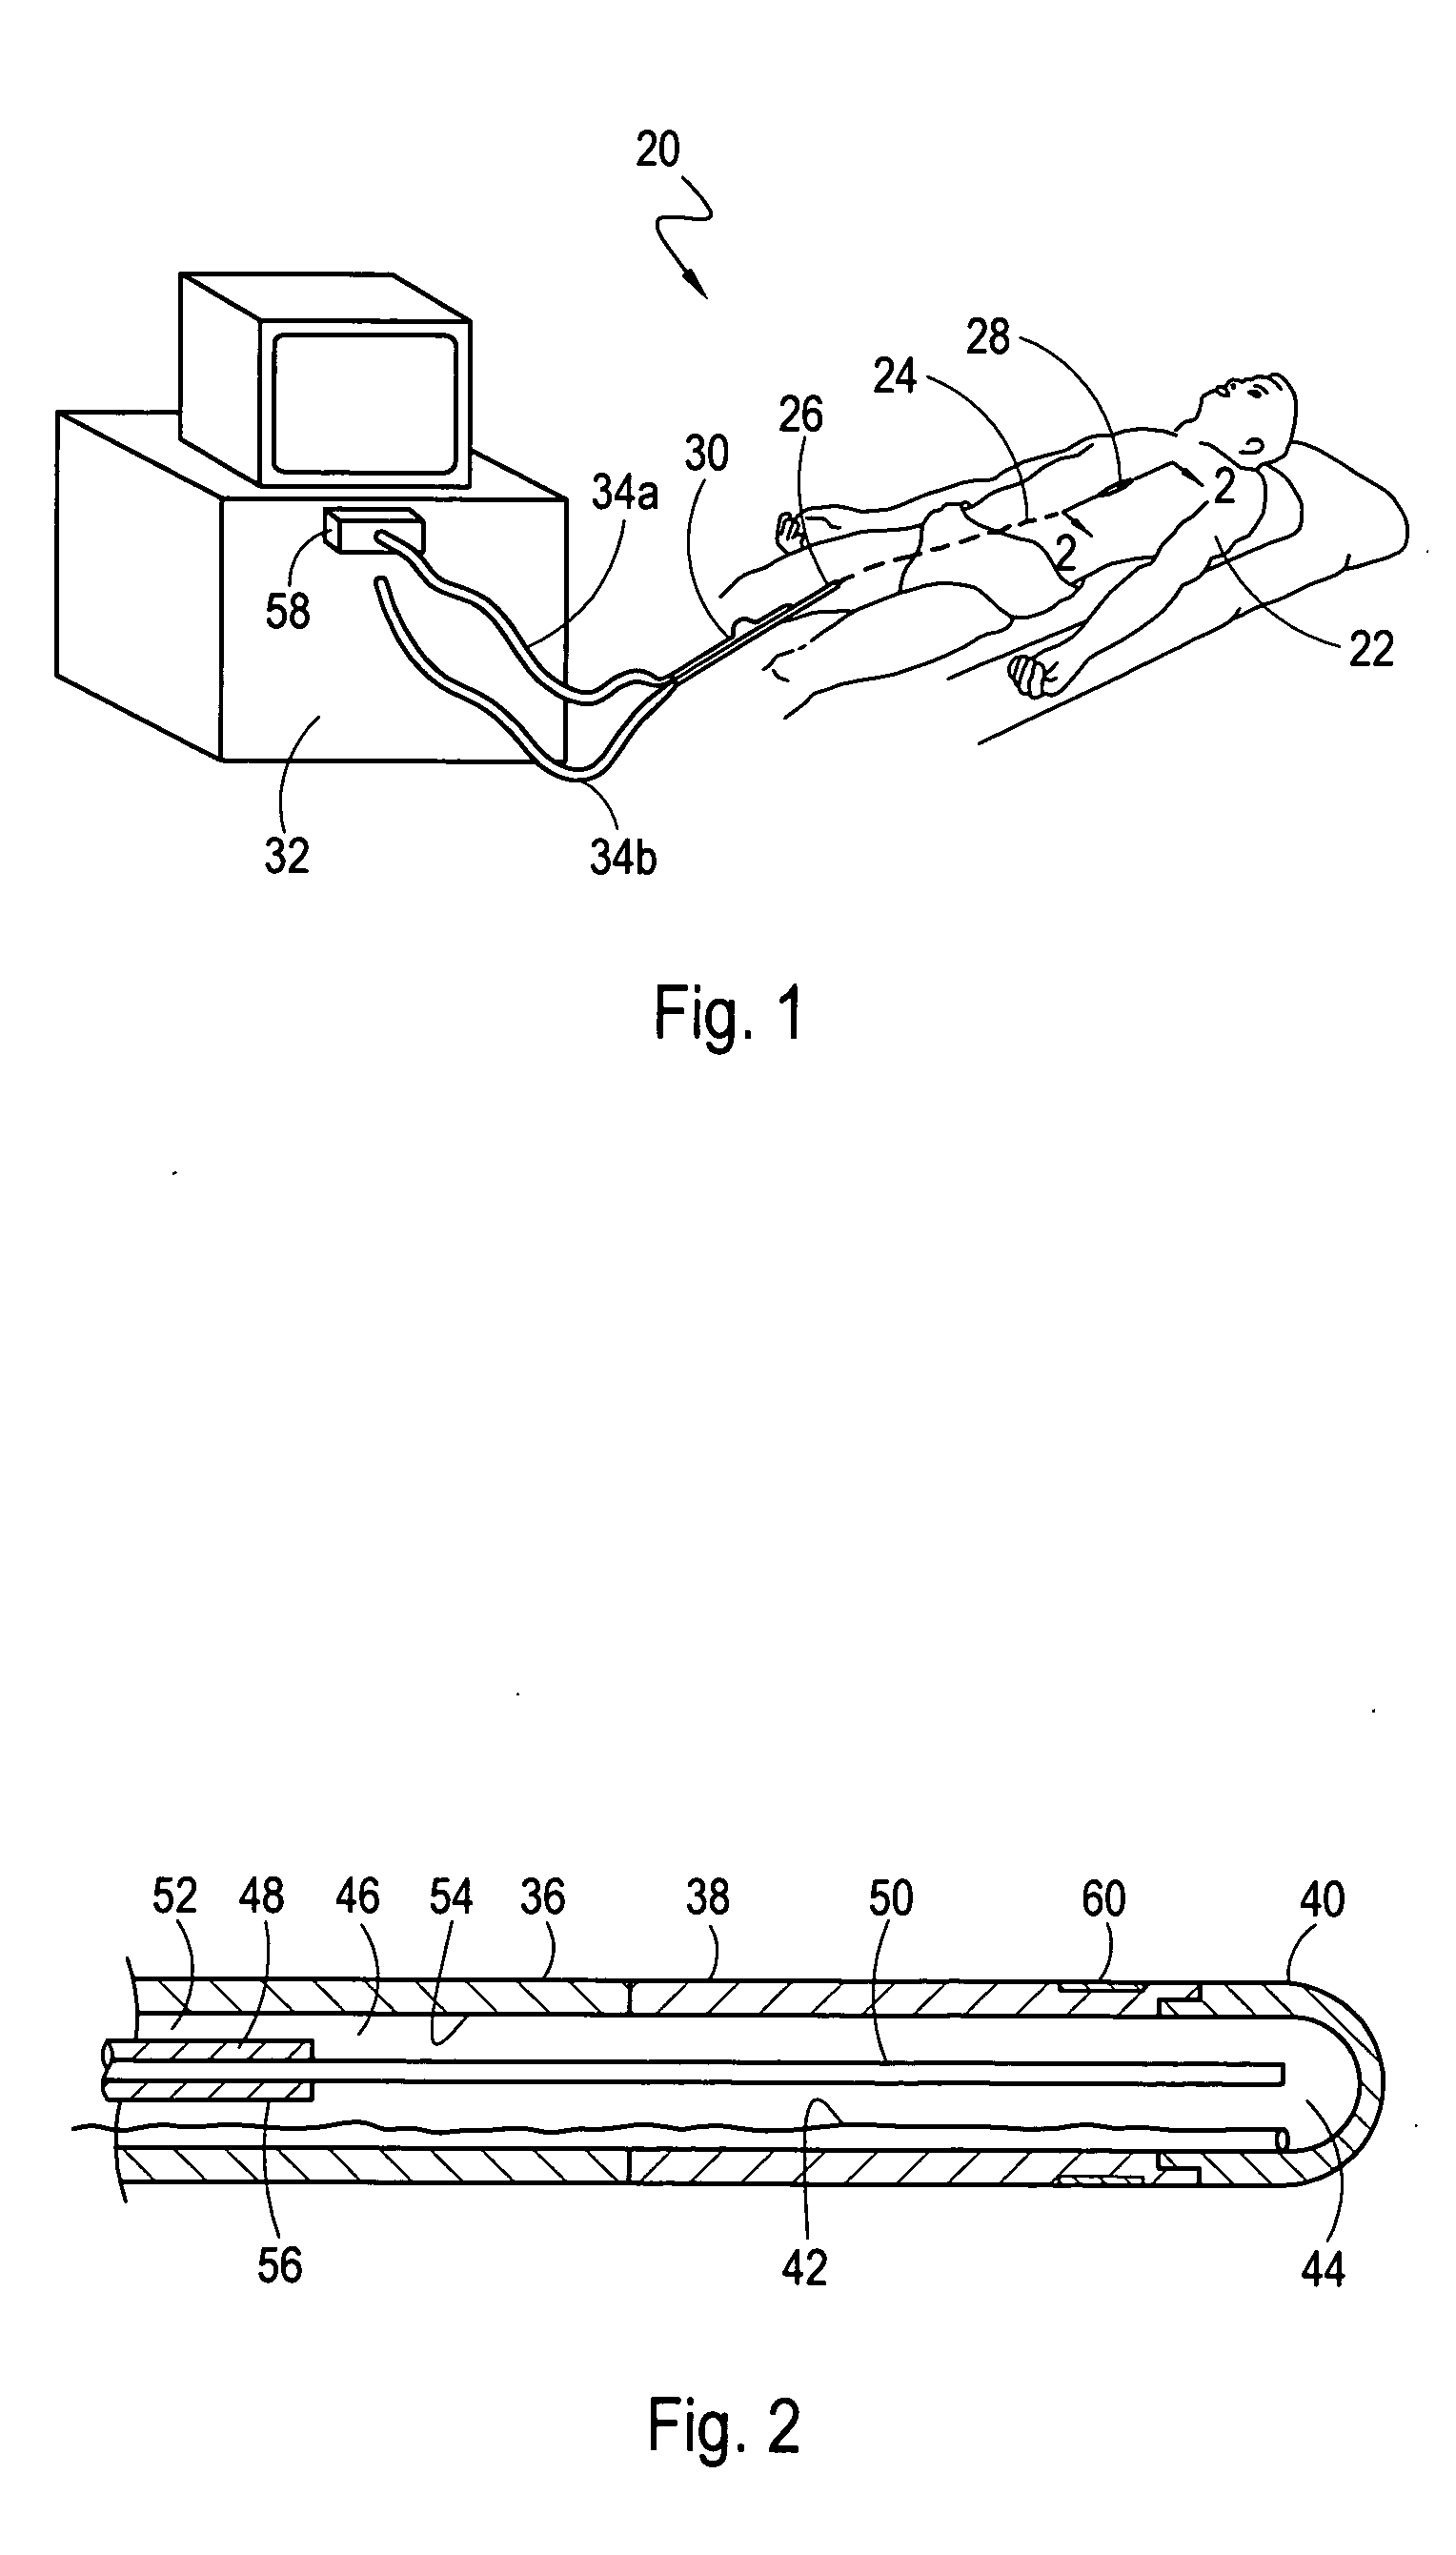 Warming gradient control for a cryoablation applicator